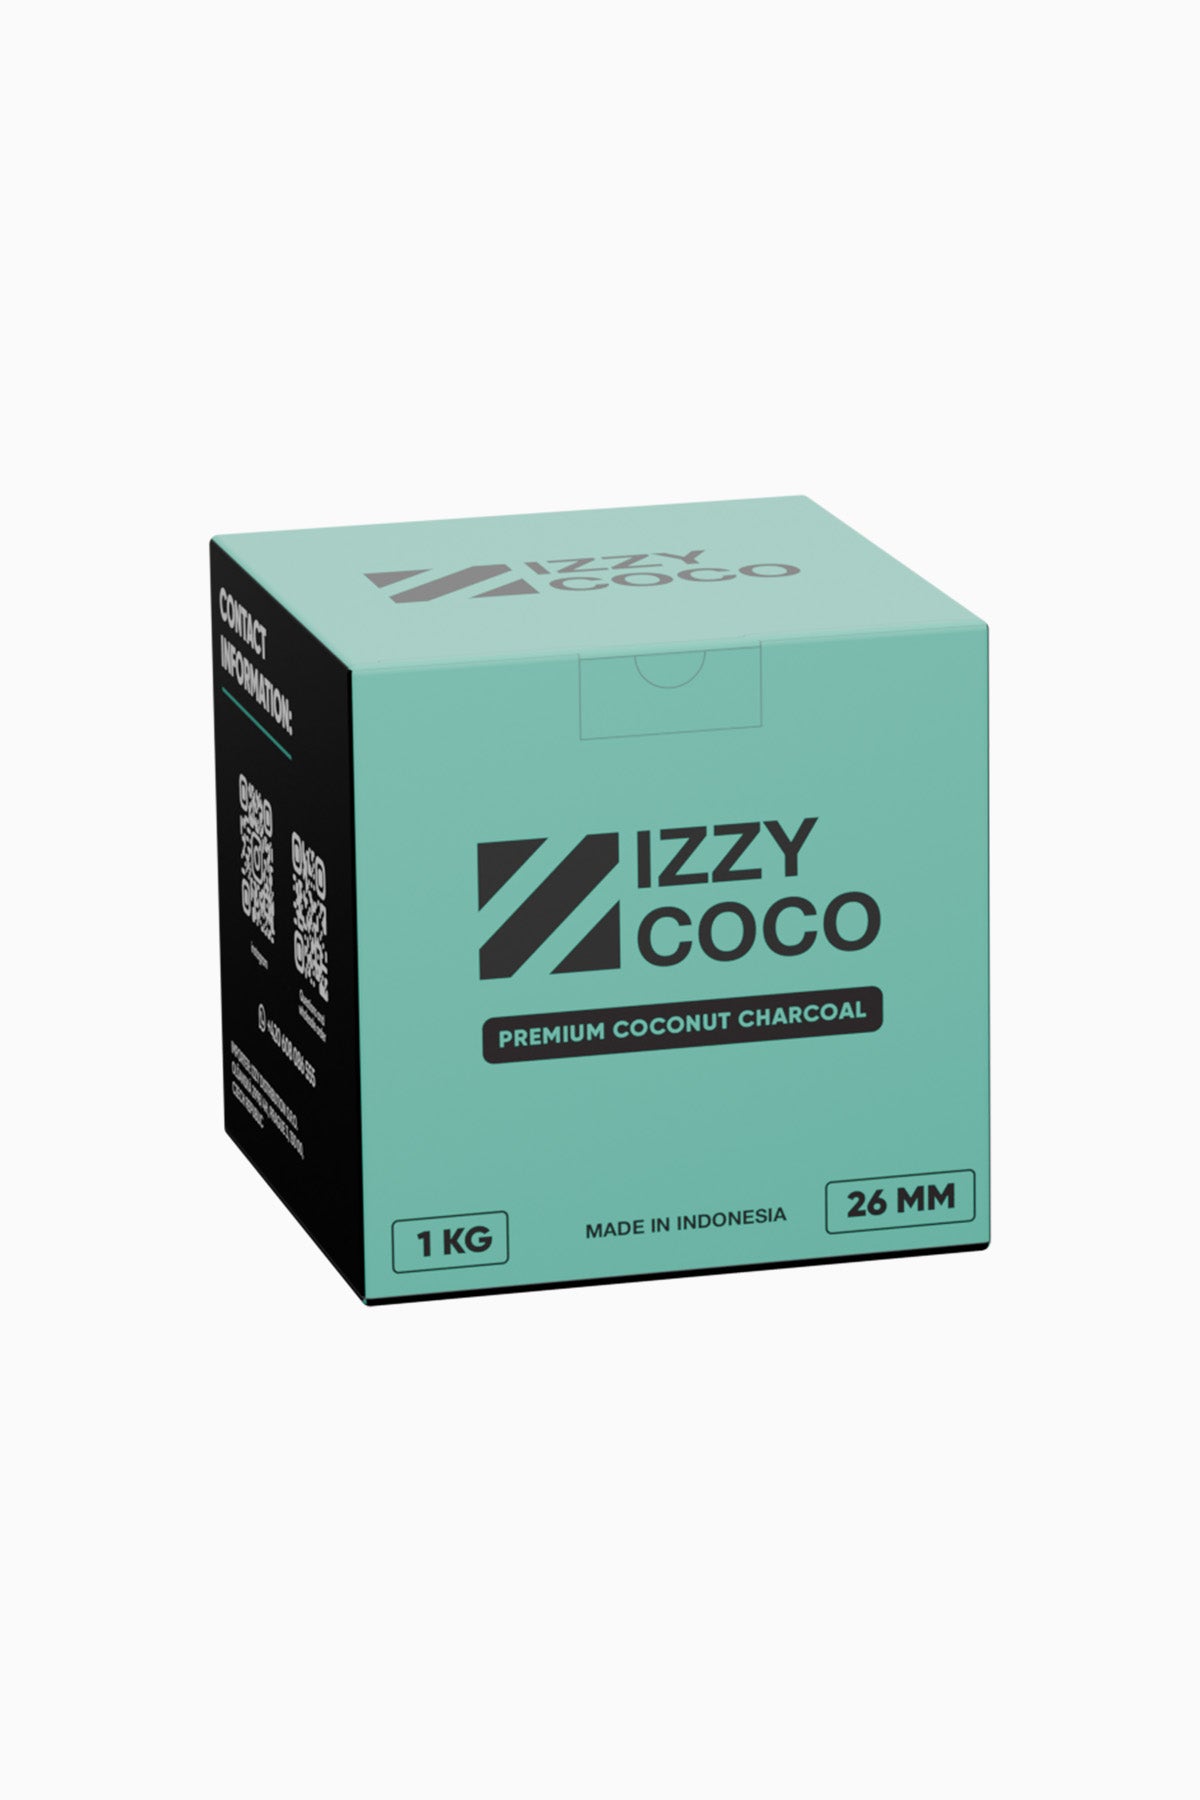 Charcoal - Izzy Coco 26mm 1kg